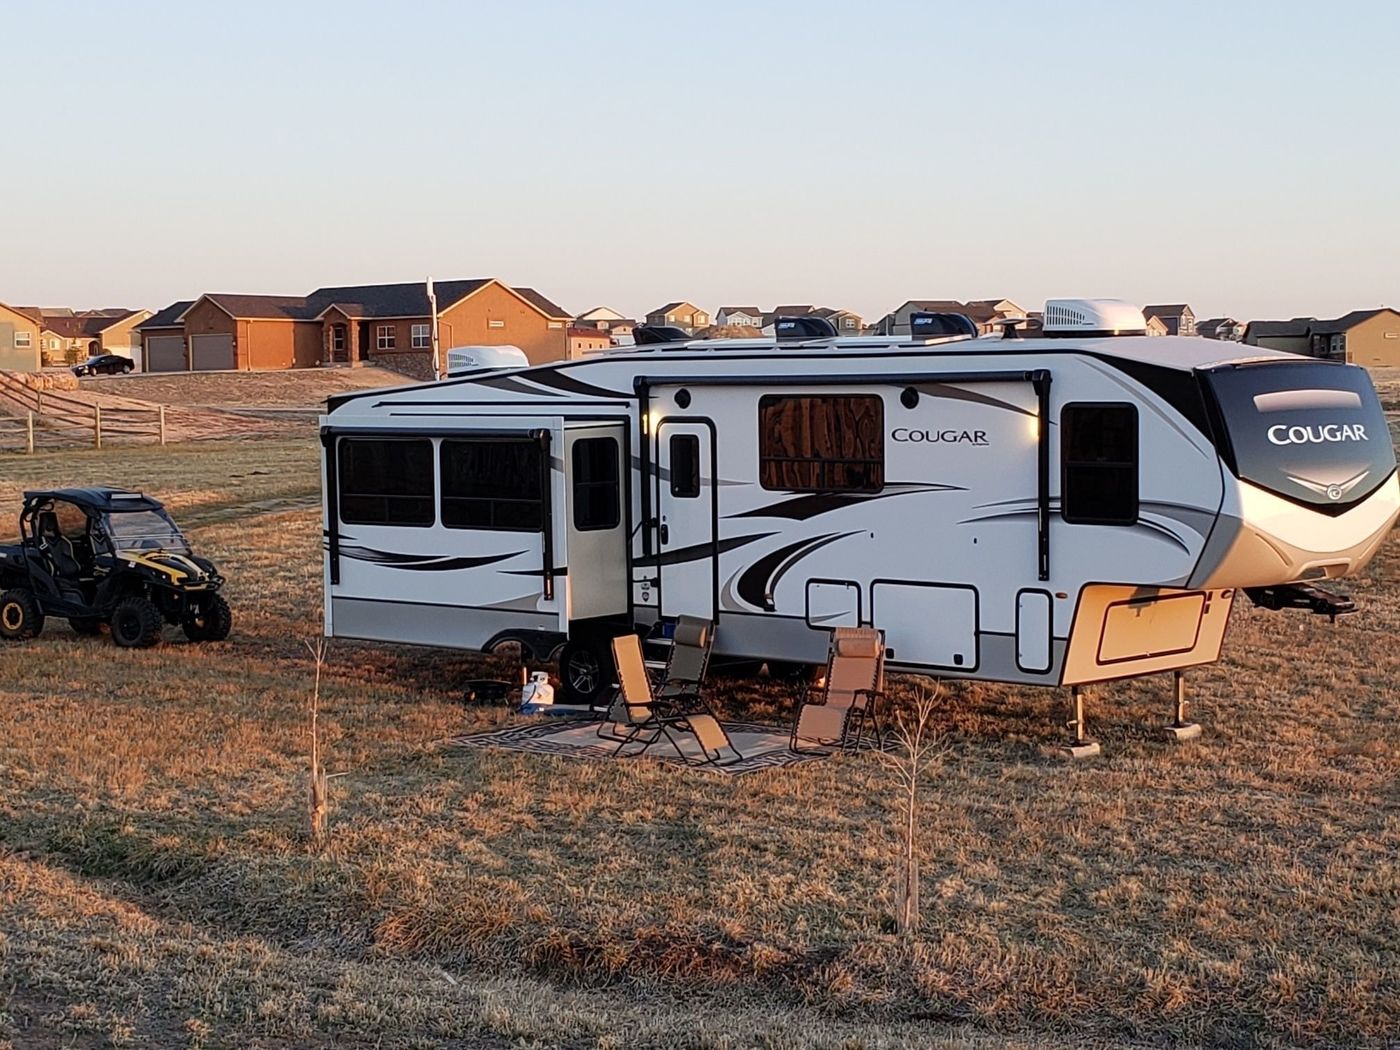 RV Rentals in Peyton, CO - - 2020 Fifth-Wheel Keystone Cougar-368mbi 5th Wheel Towing With 6.5 Foot Bed